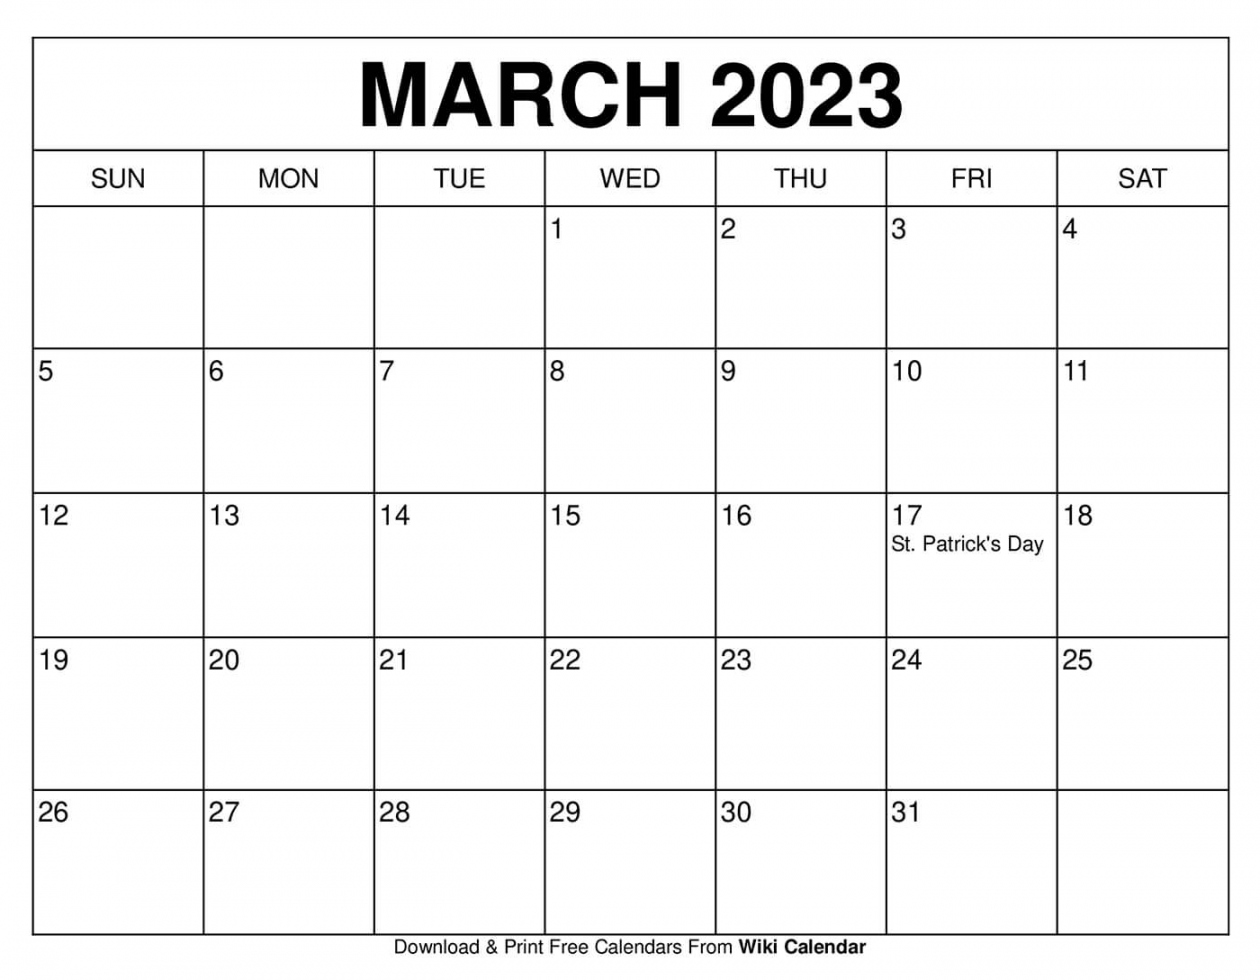 Free Printable March  Calendar Templates With Holidays - FREE Printables - March 2023 Calendar Free Printable